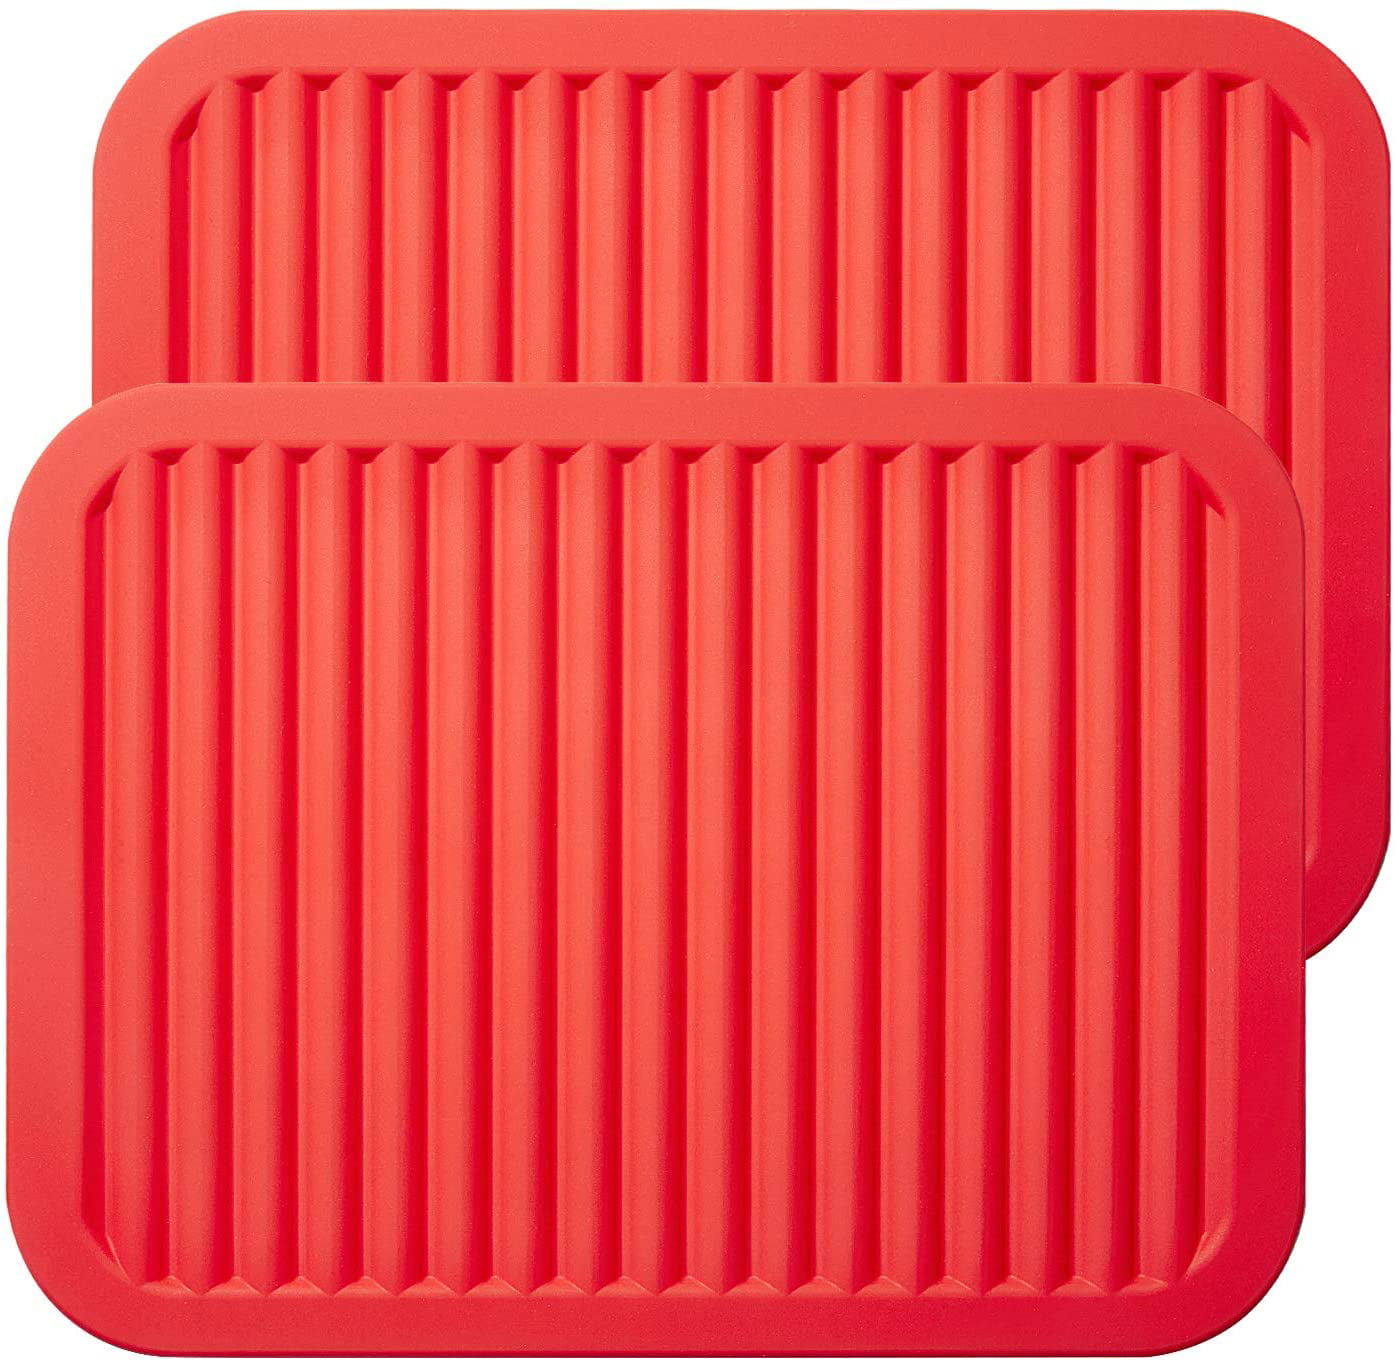 Spoon Rest 2 Set ME.FAN Silicone Trivets 9 x 12 Silicone Potholder Hot Pads Large Coasters Orange Kitchen Table Mat Silicone Pot Holders